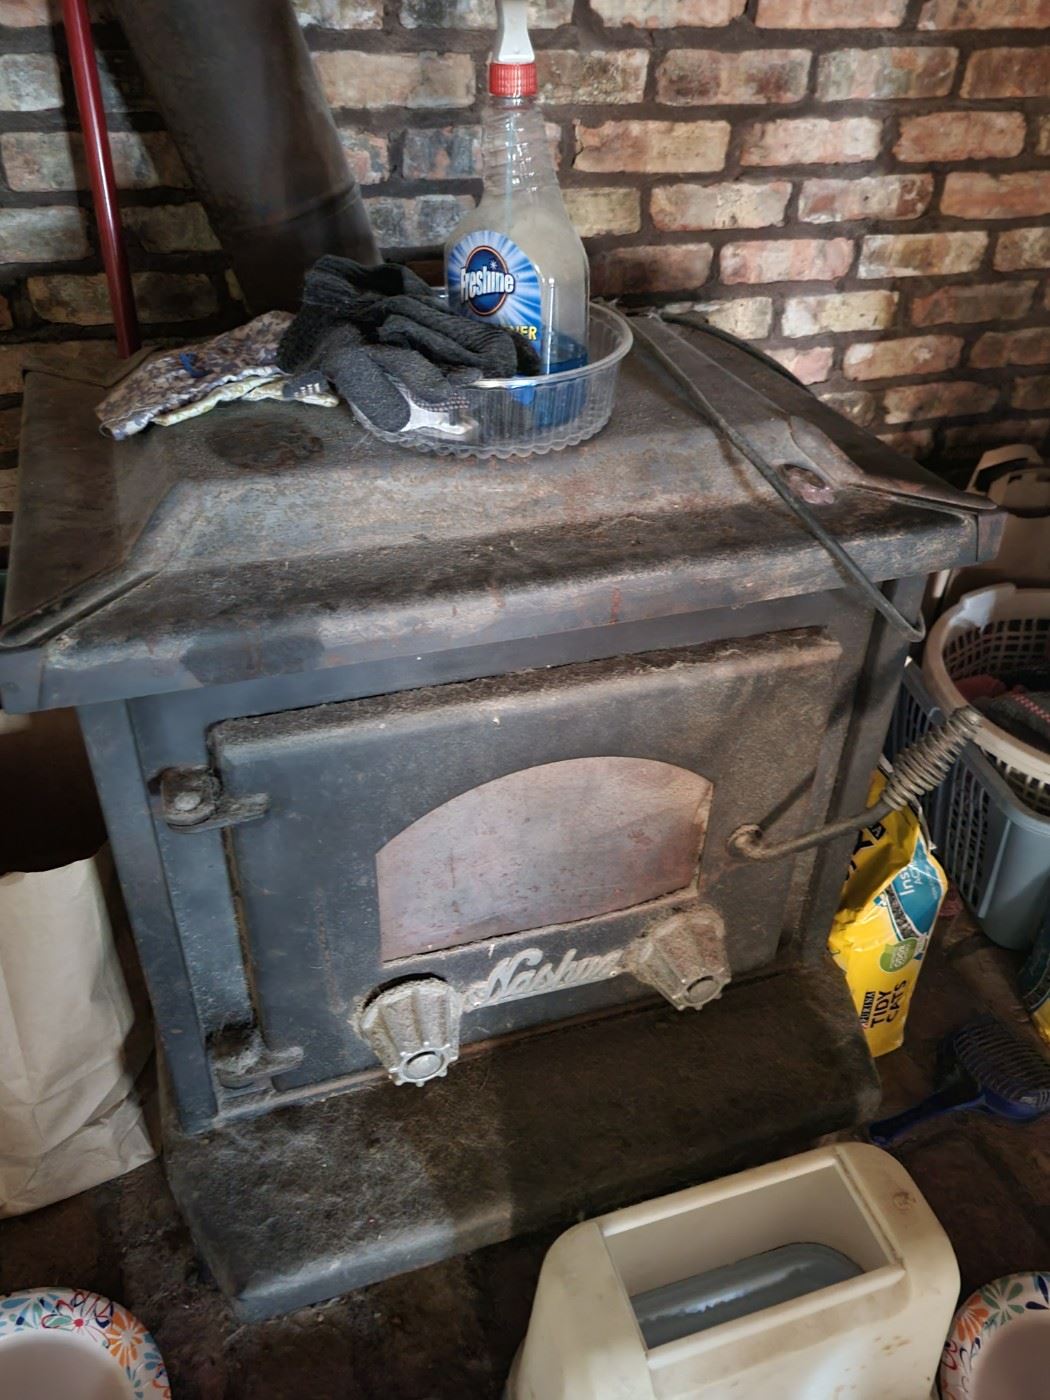 Nashua cast iron wood burner This item will need to be removed from existing home. Please bring help and tools to remove item. Must schedule an appointment for pickup. $1000 OBO